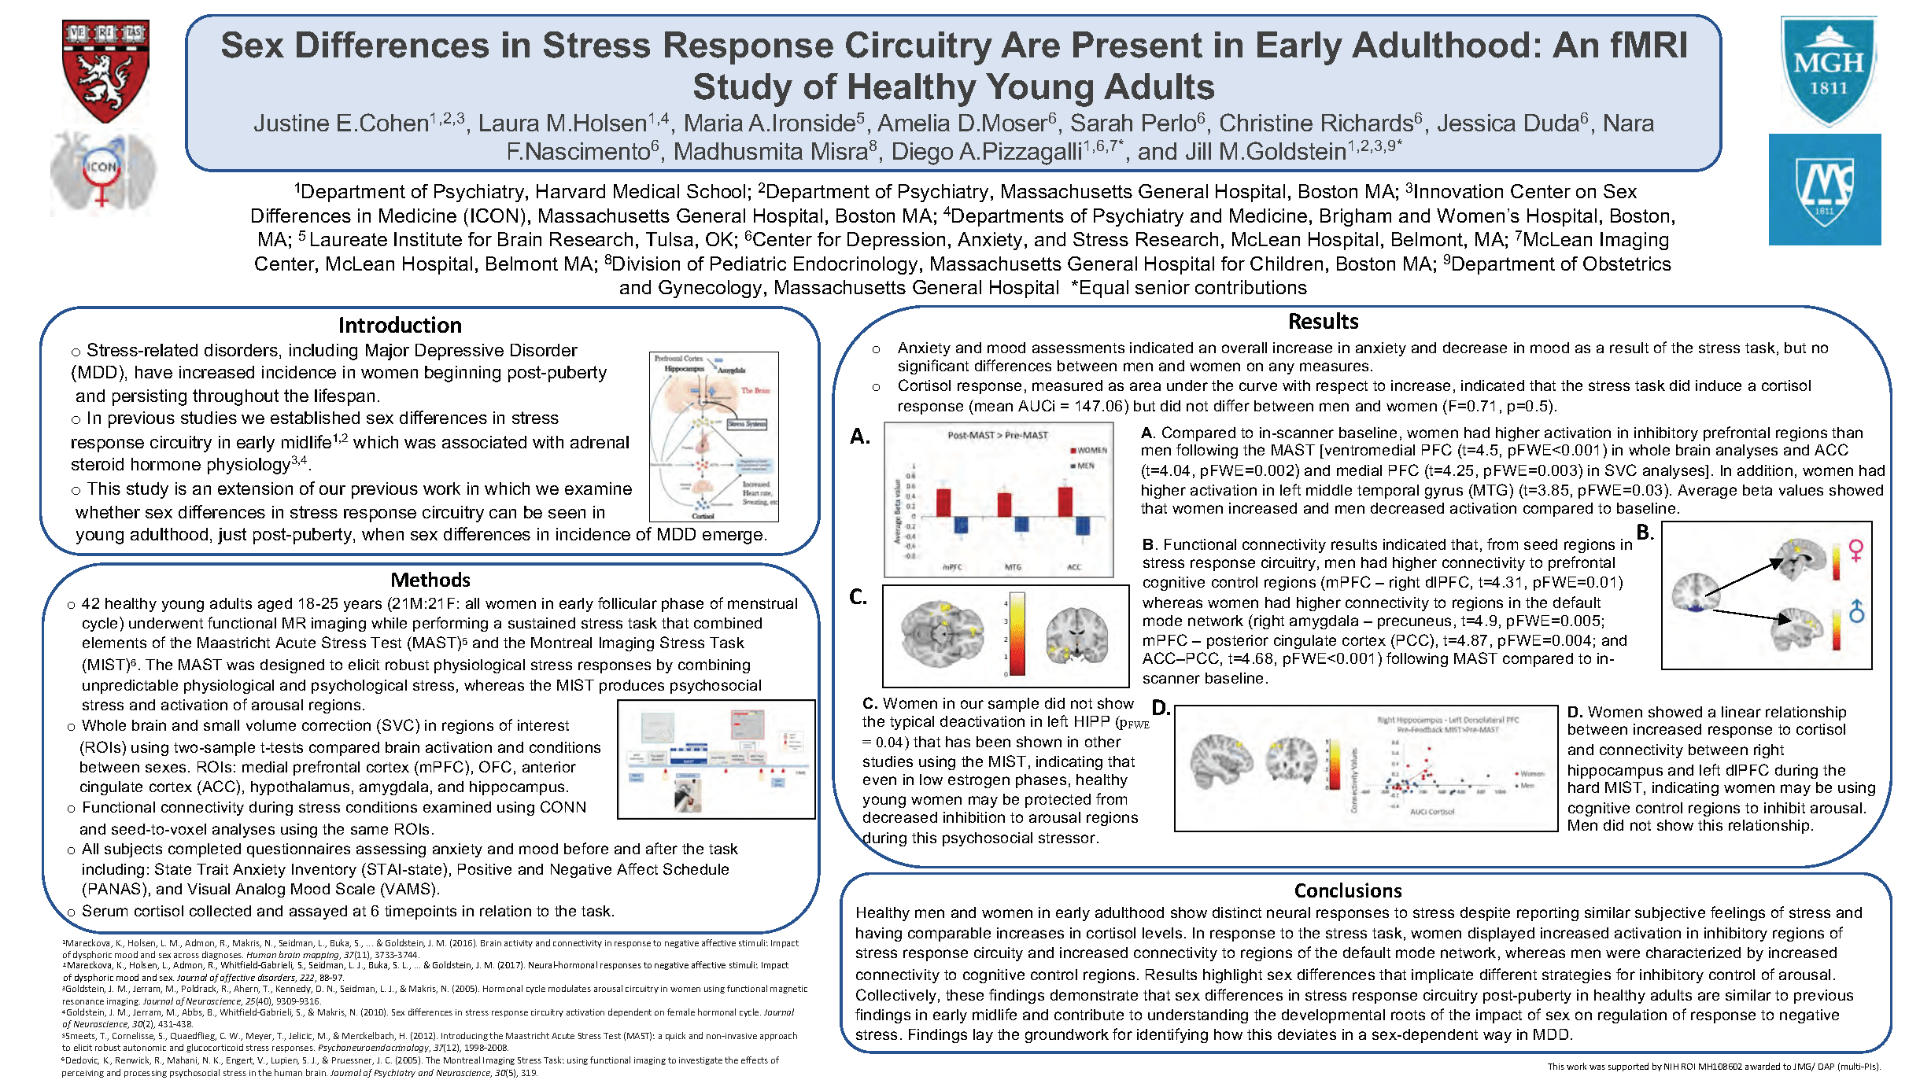 Sex Differences in Stress Response Circuitry are Present in Early Adulthood: An fMRI Study of Healthy Young Adults